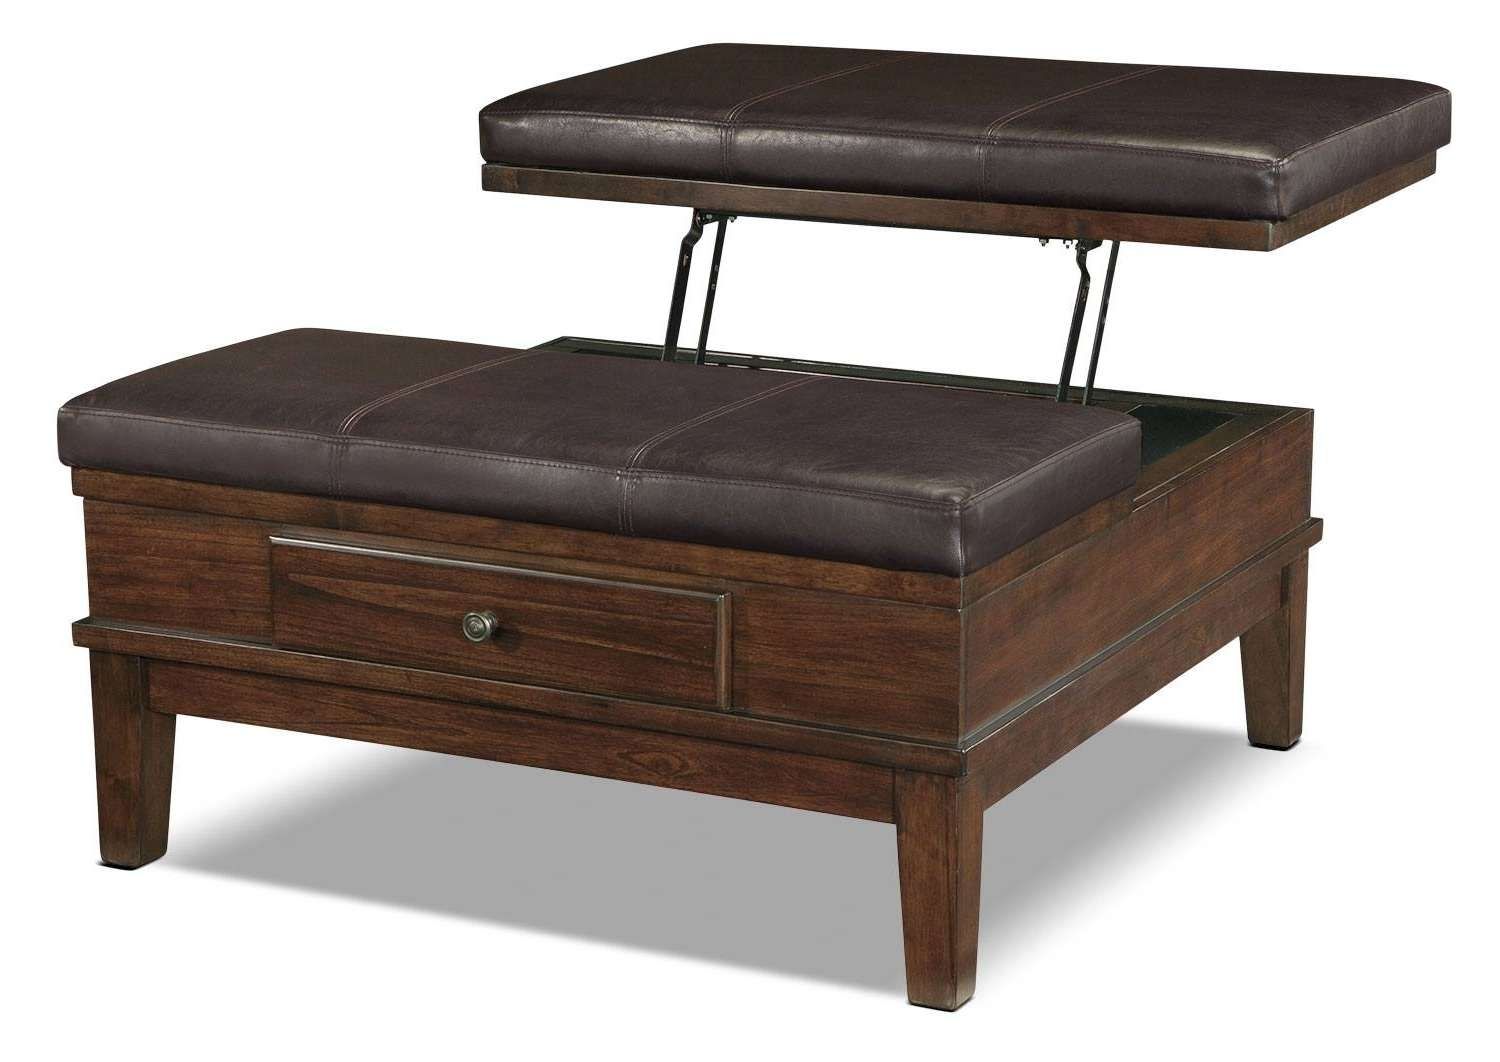 [%latest Waverly Lift Top Coffee Tables Inside Table : 28 [ Waverly Lift Top Coffee Table ] | Waverly Vintage|table : 28 [ Waverly Lift Top Coffee Table ] | Waverly Vintage Intended For Famous Waverly Lift Top Coffee Tables%] (View 17 of 20)